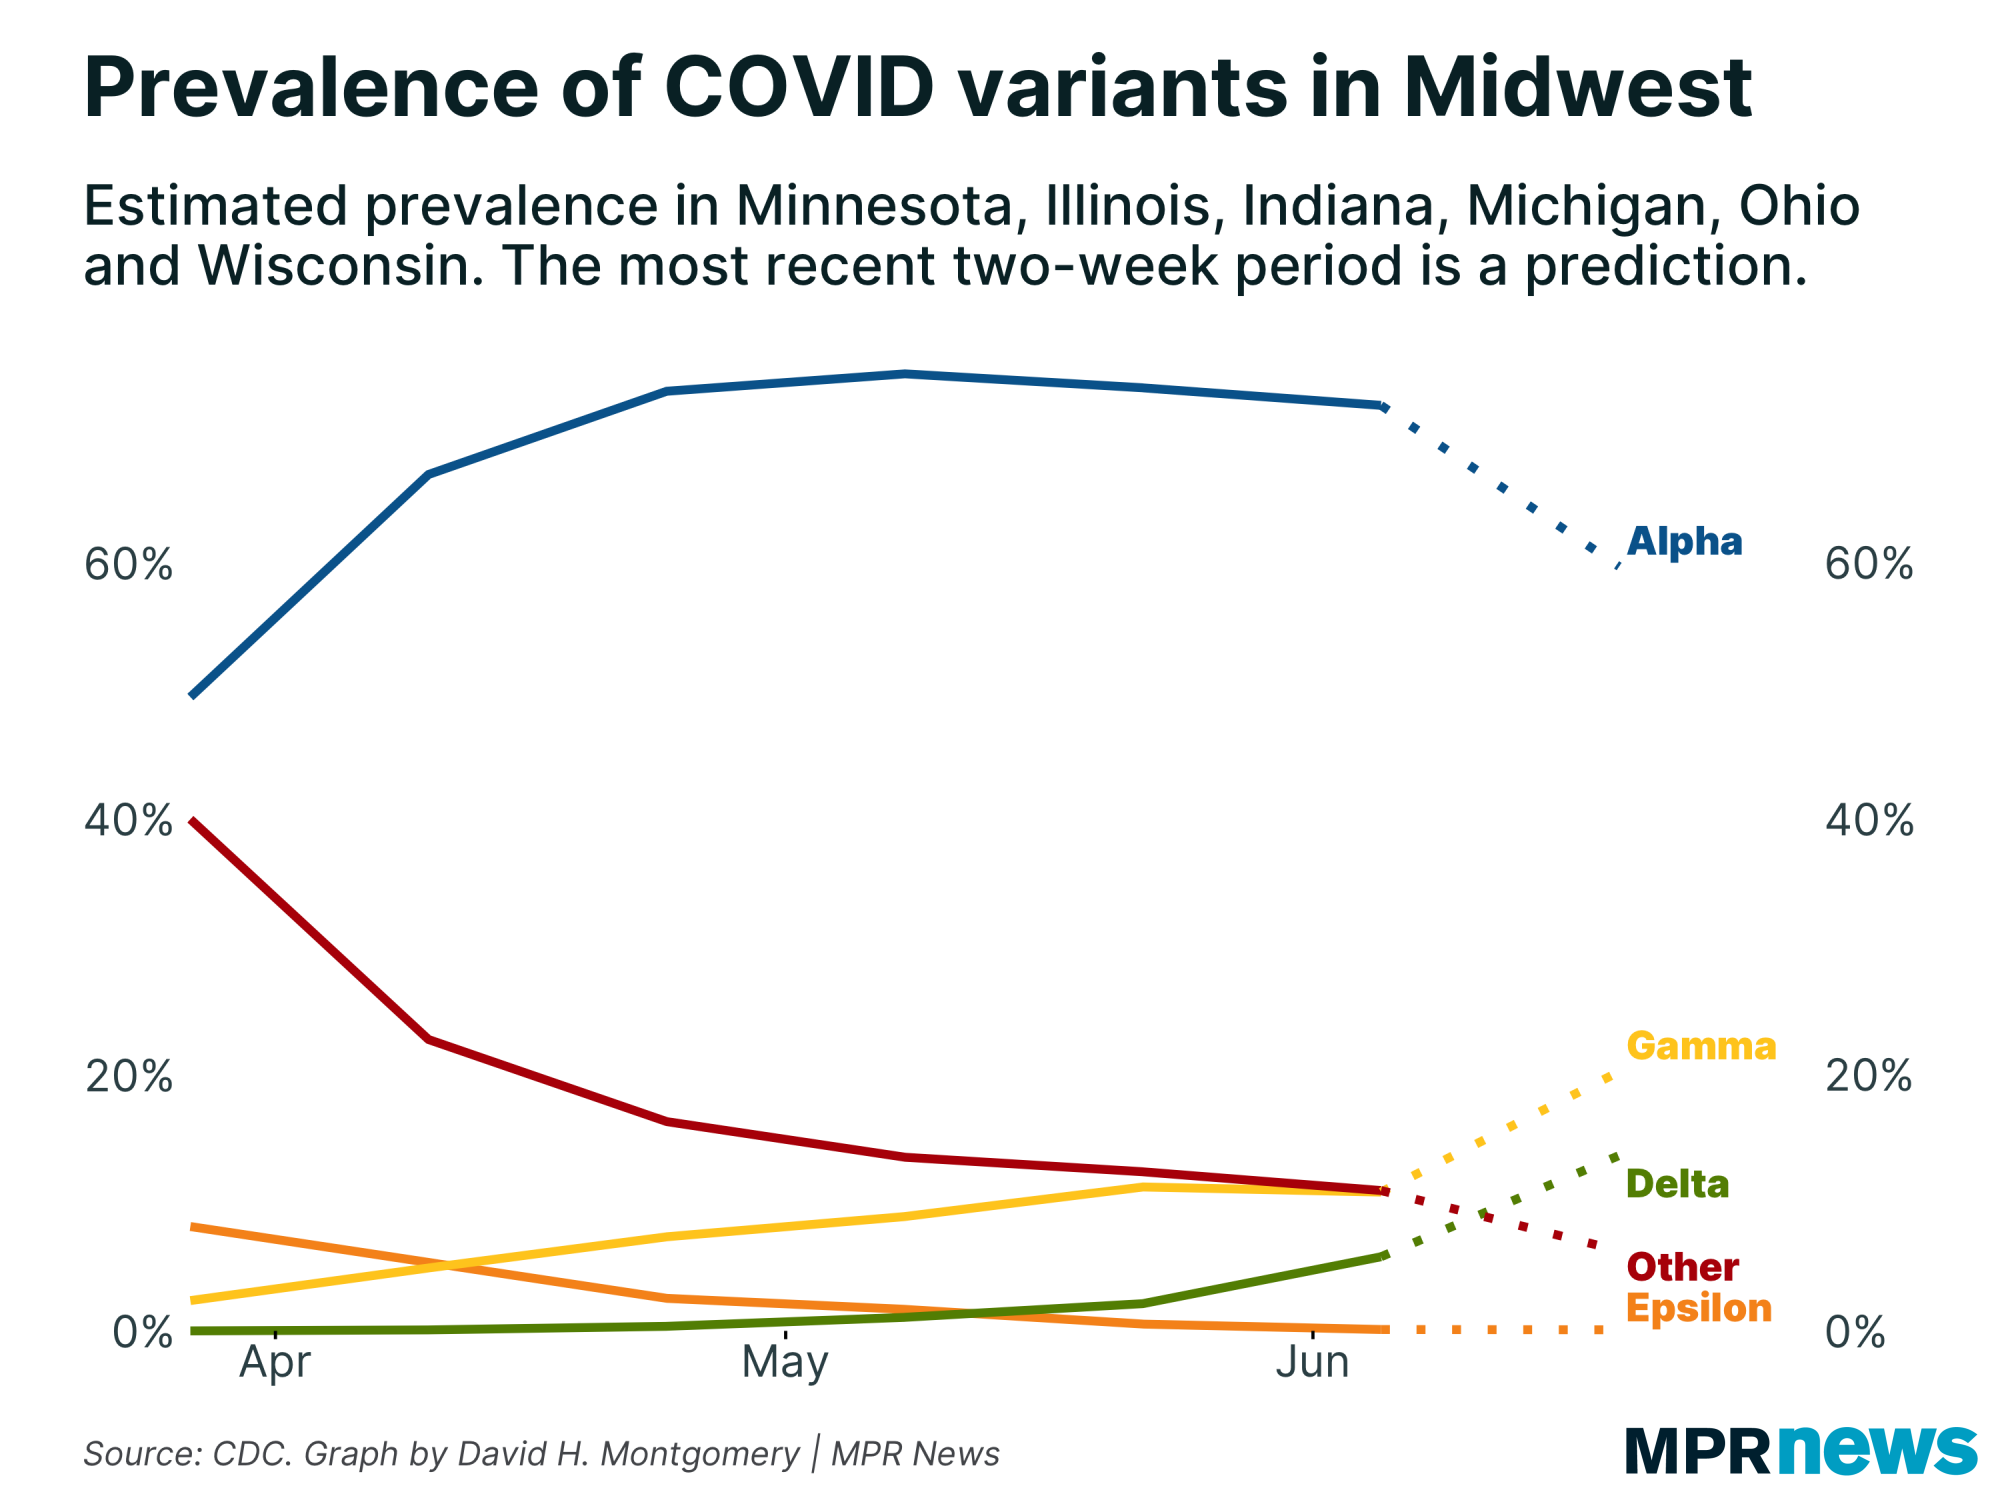 Graph of the prevalence of COVID-19 variants in the Midwest